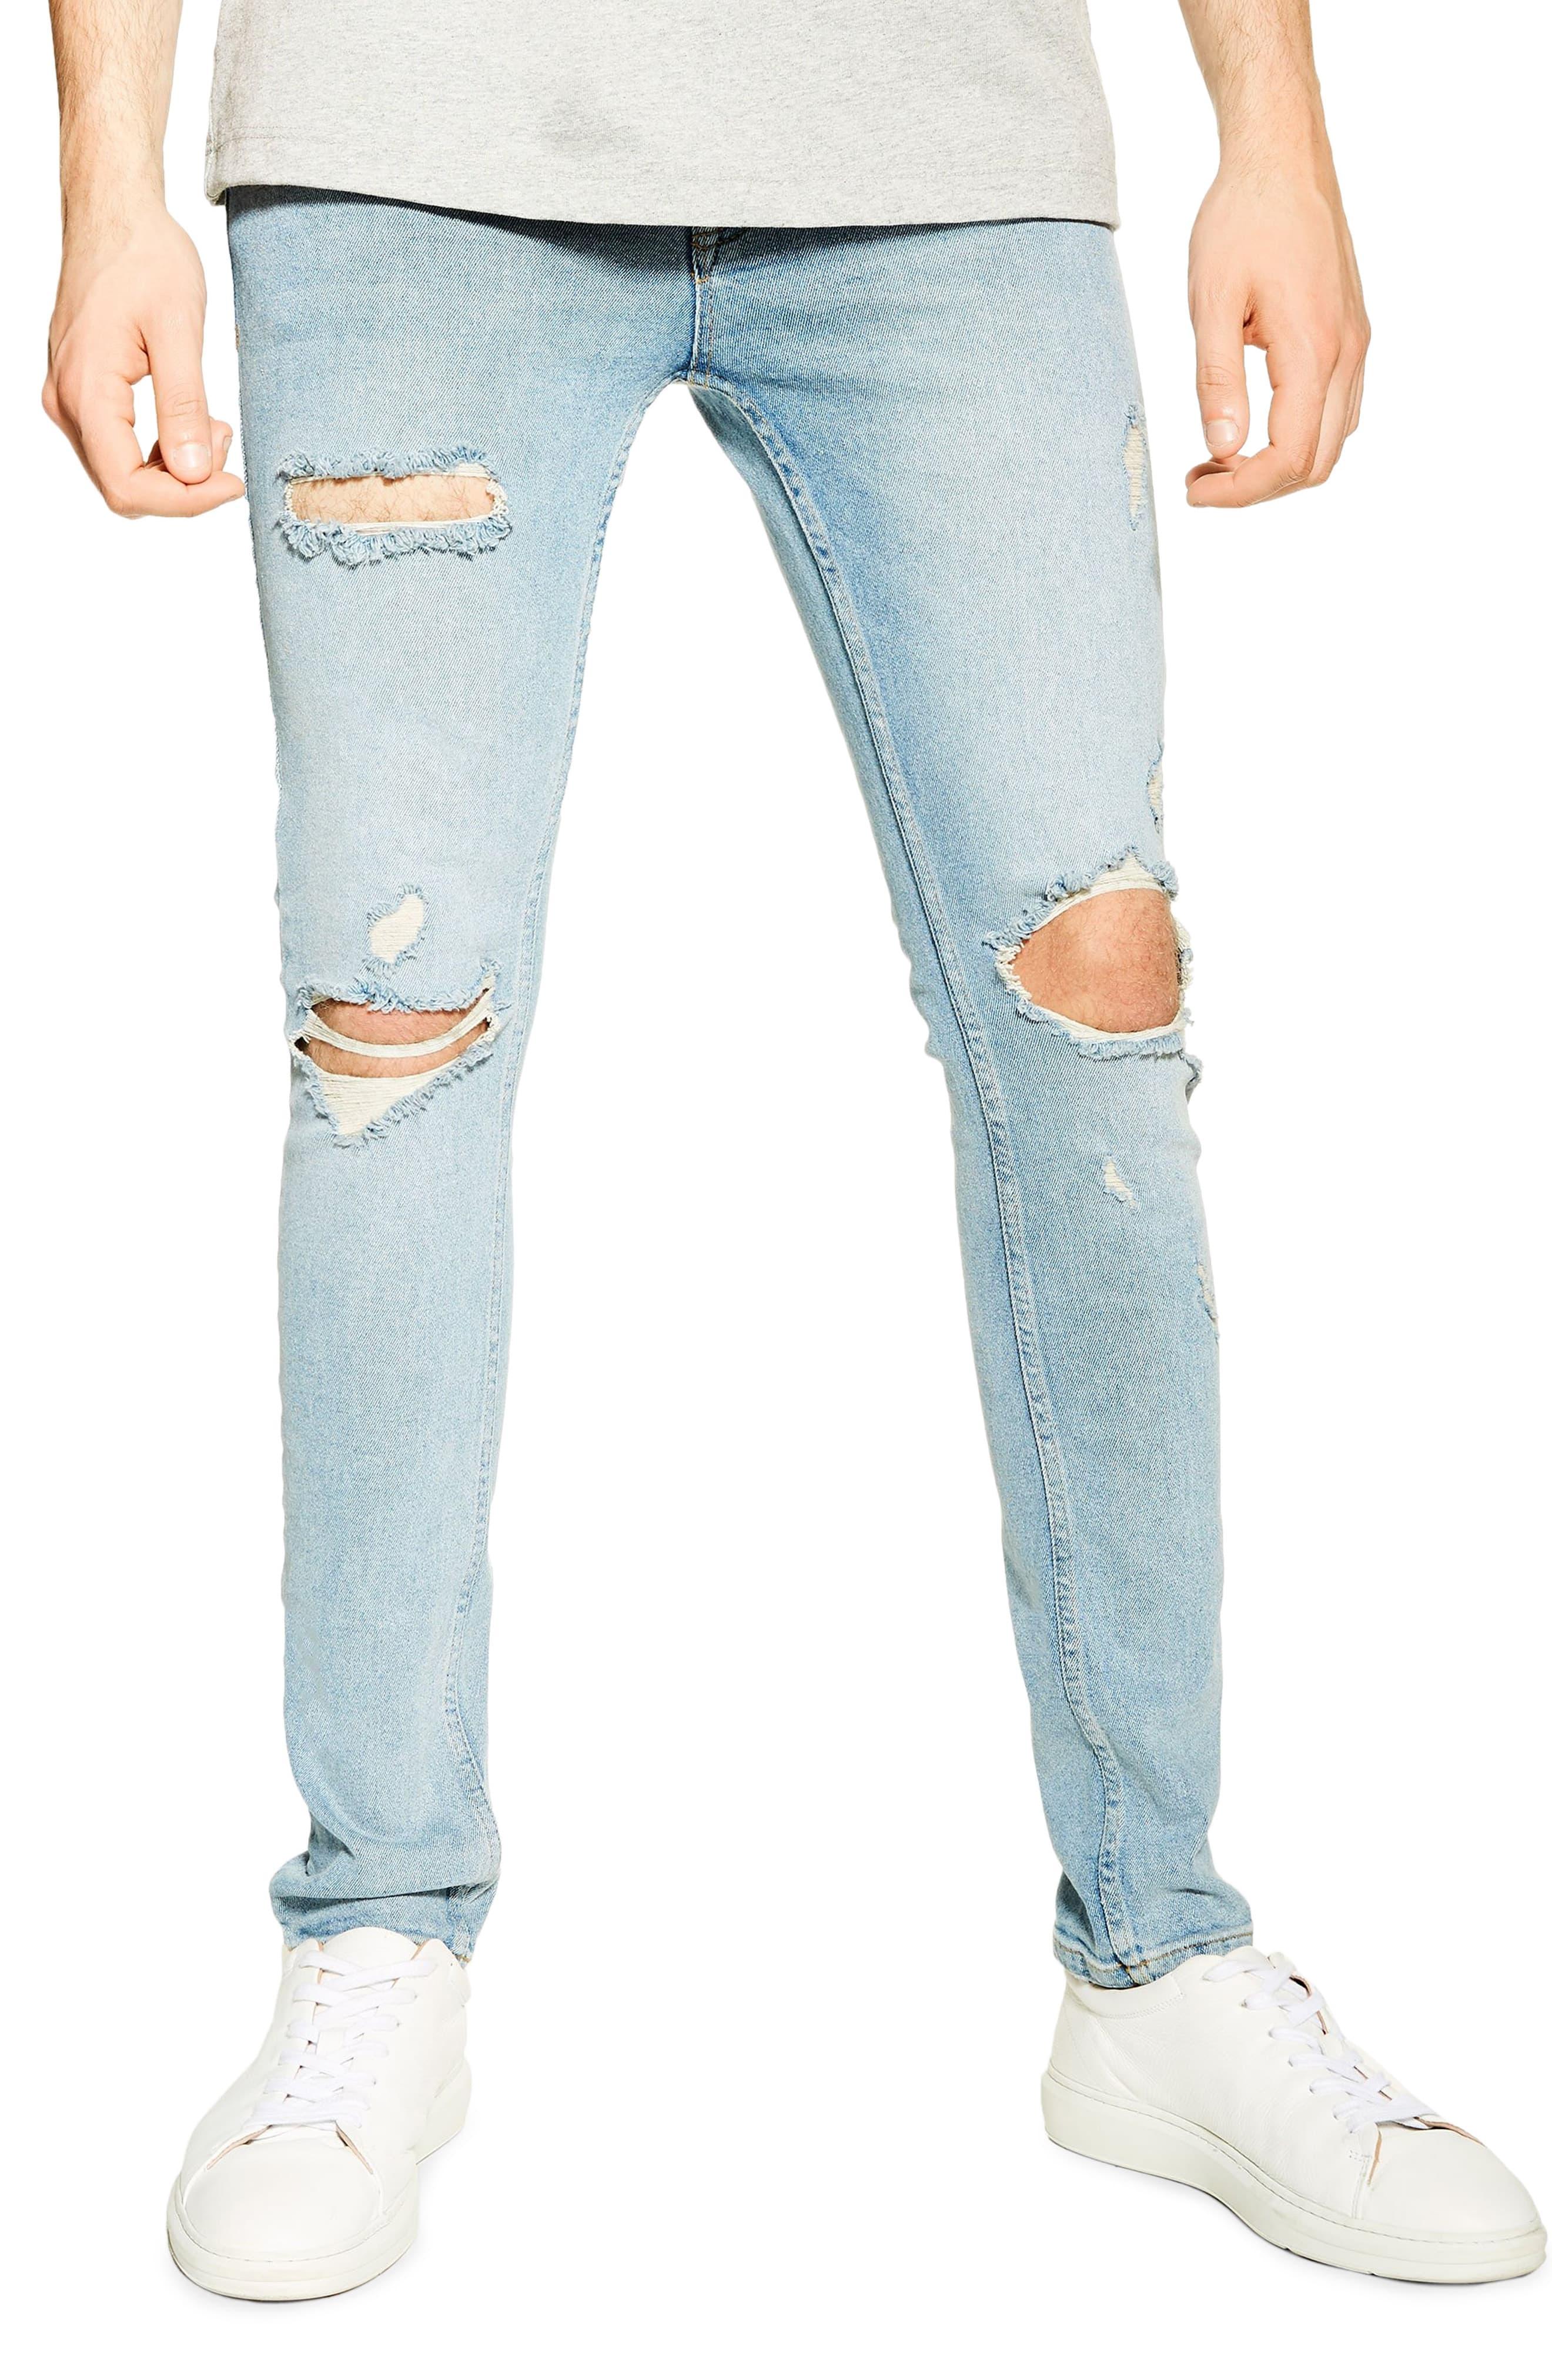 TOPMAN Ripped Stretch Skinny Fit Jeans in Blue for Men - Lyst